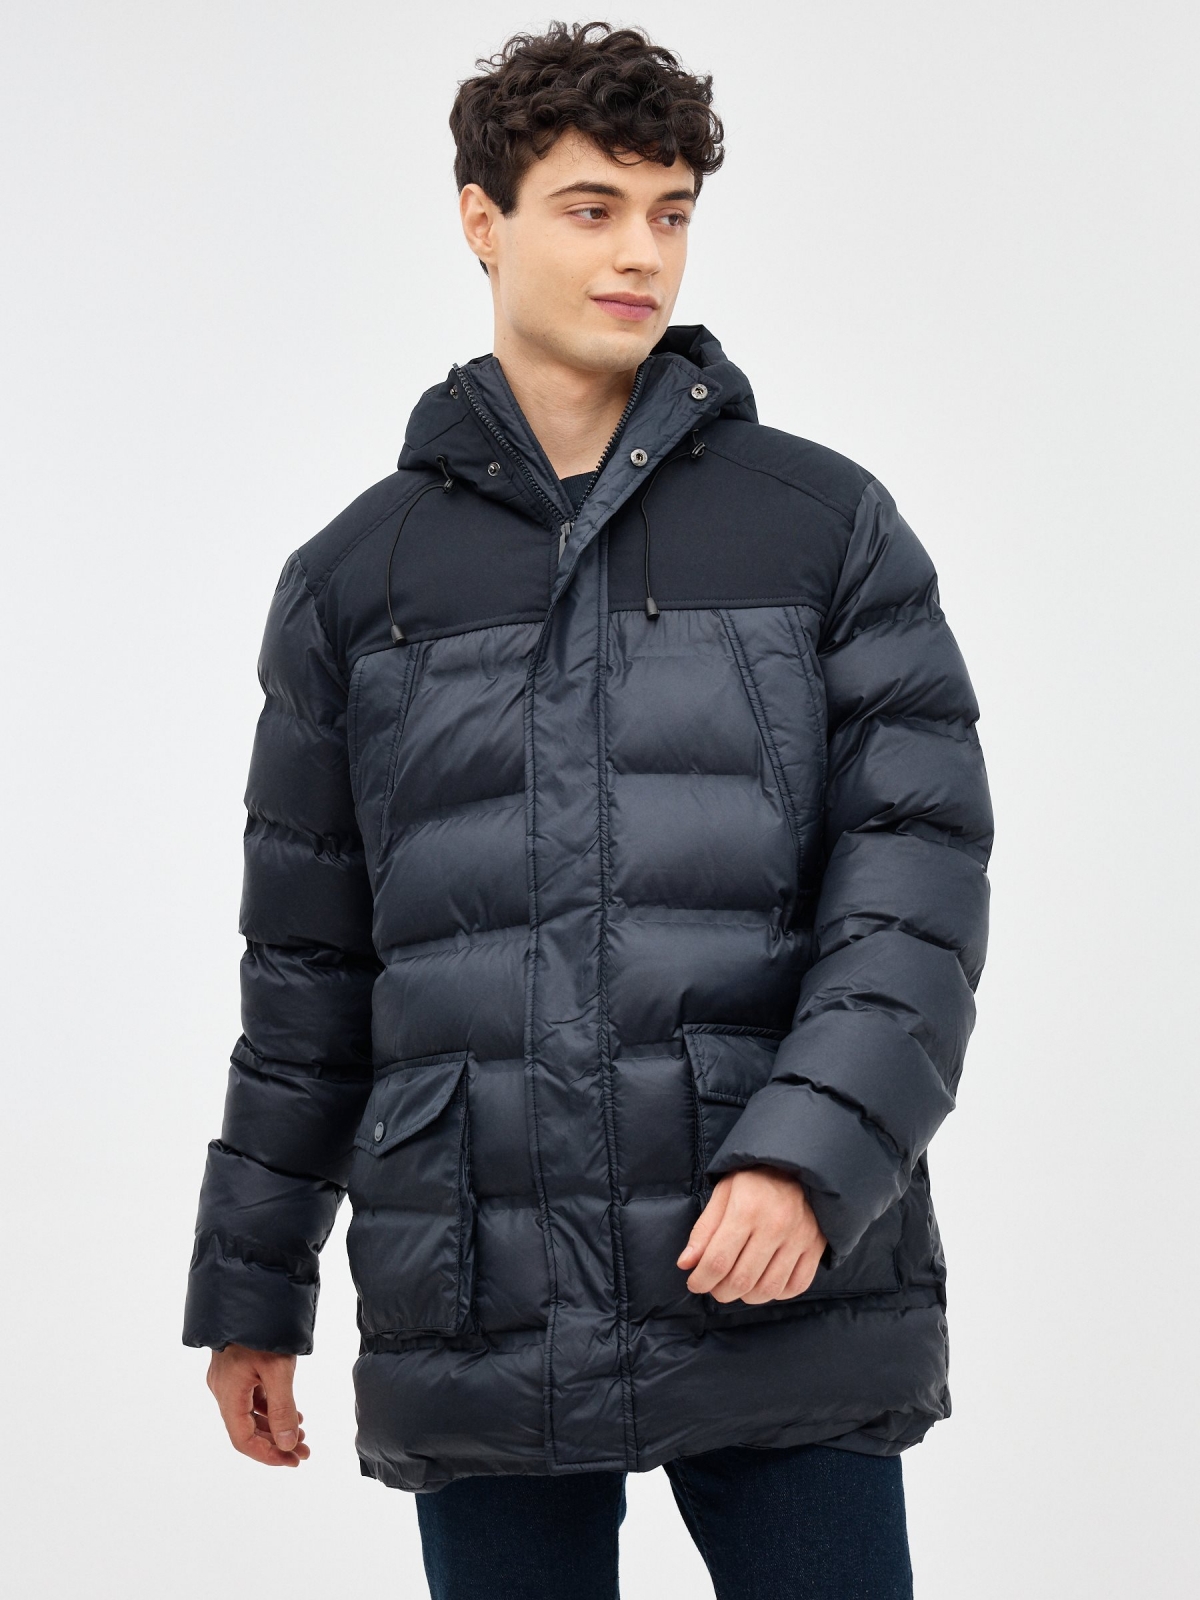 Hooded parka blue middle front view